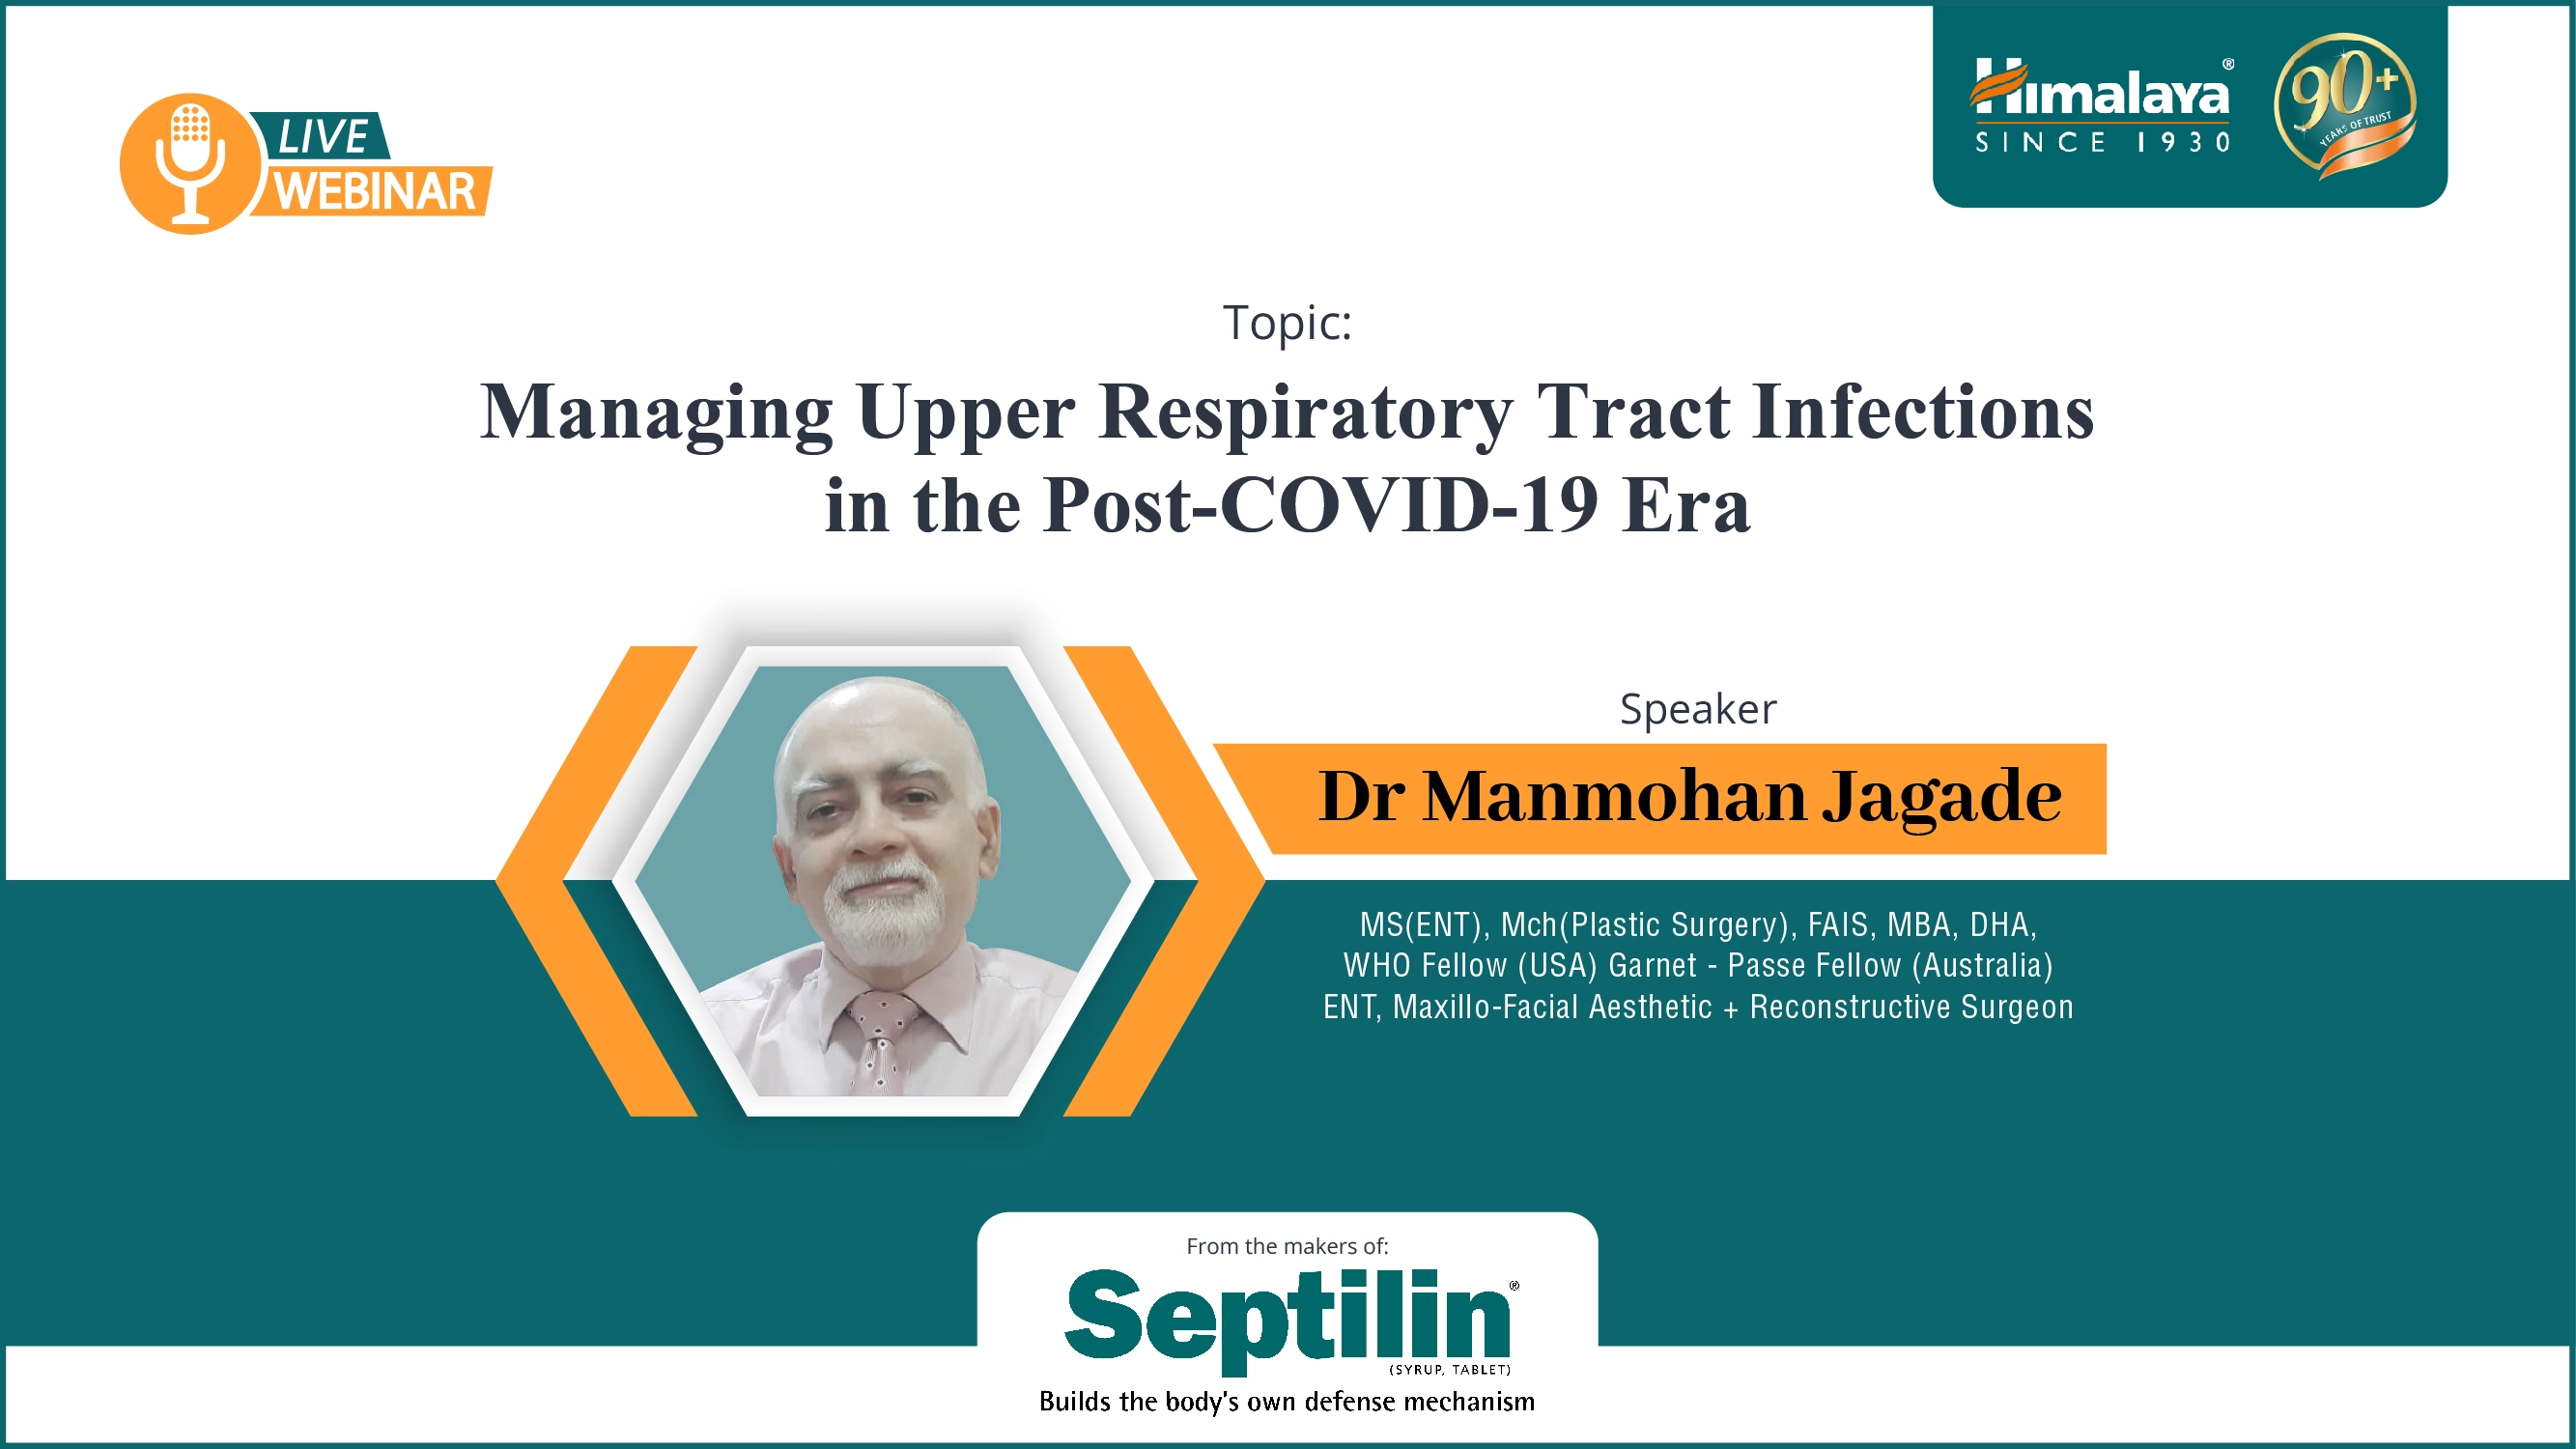 Managing Upper Respiratory Tract Infections in Post-COVID-19 Era